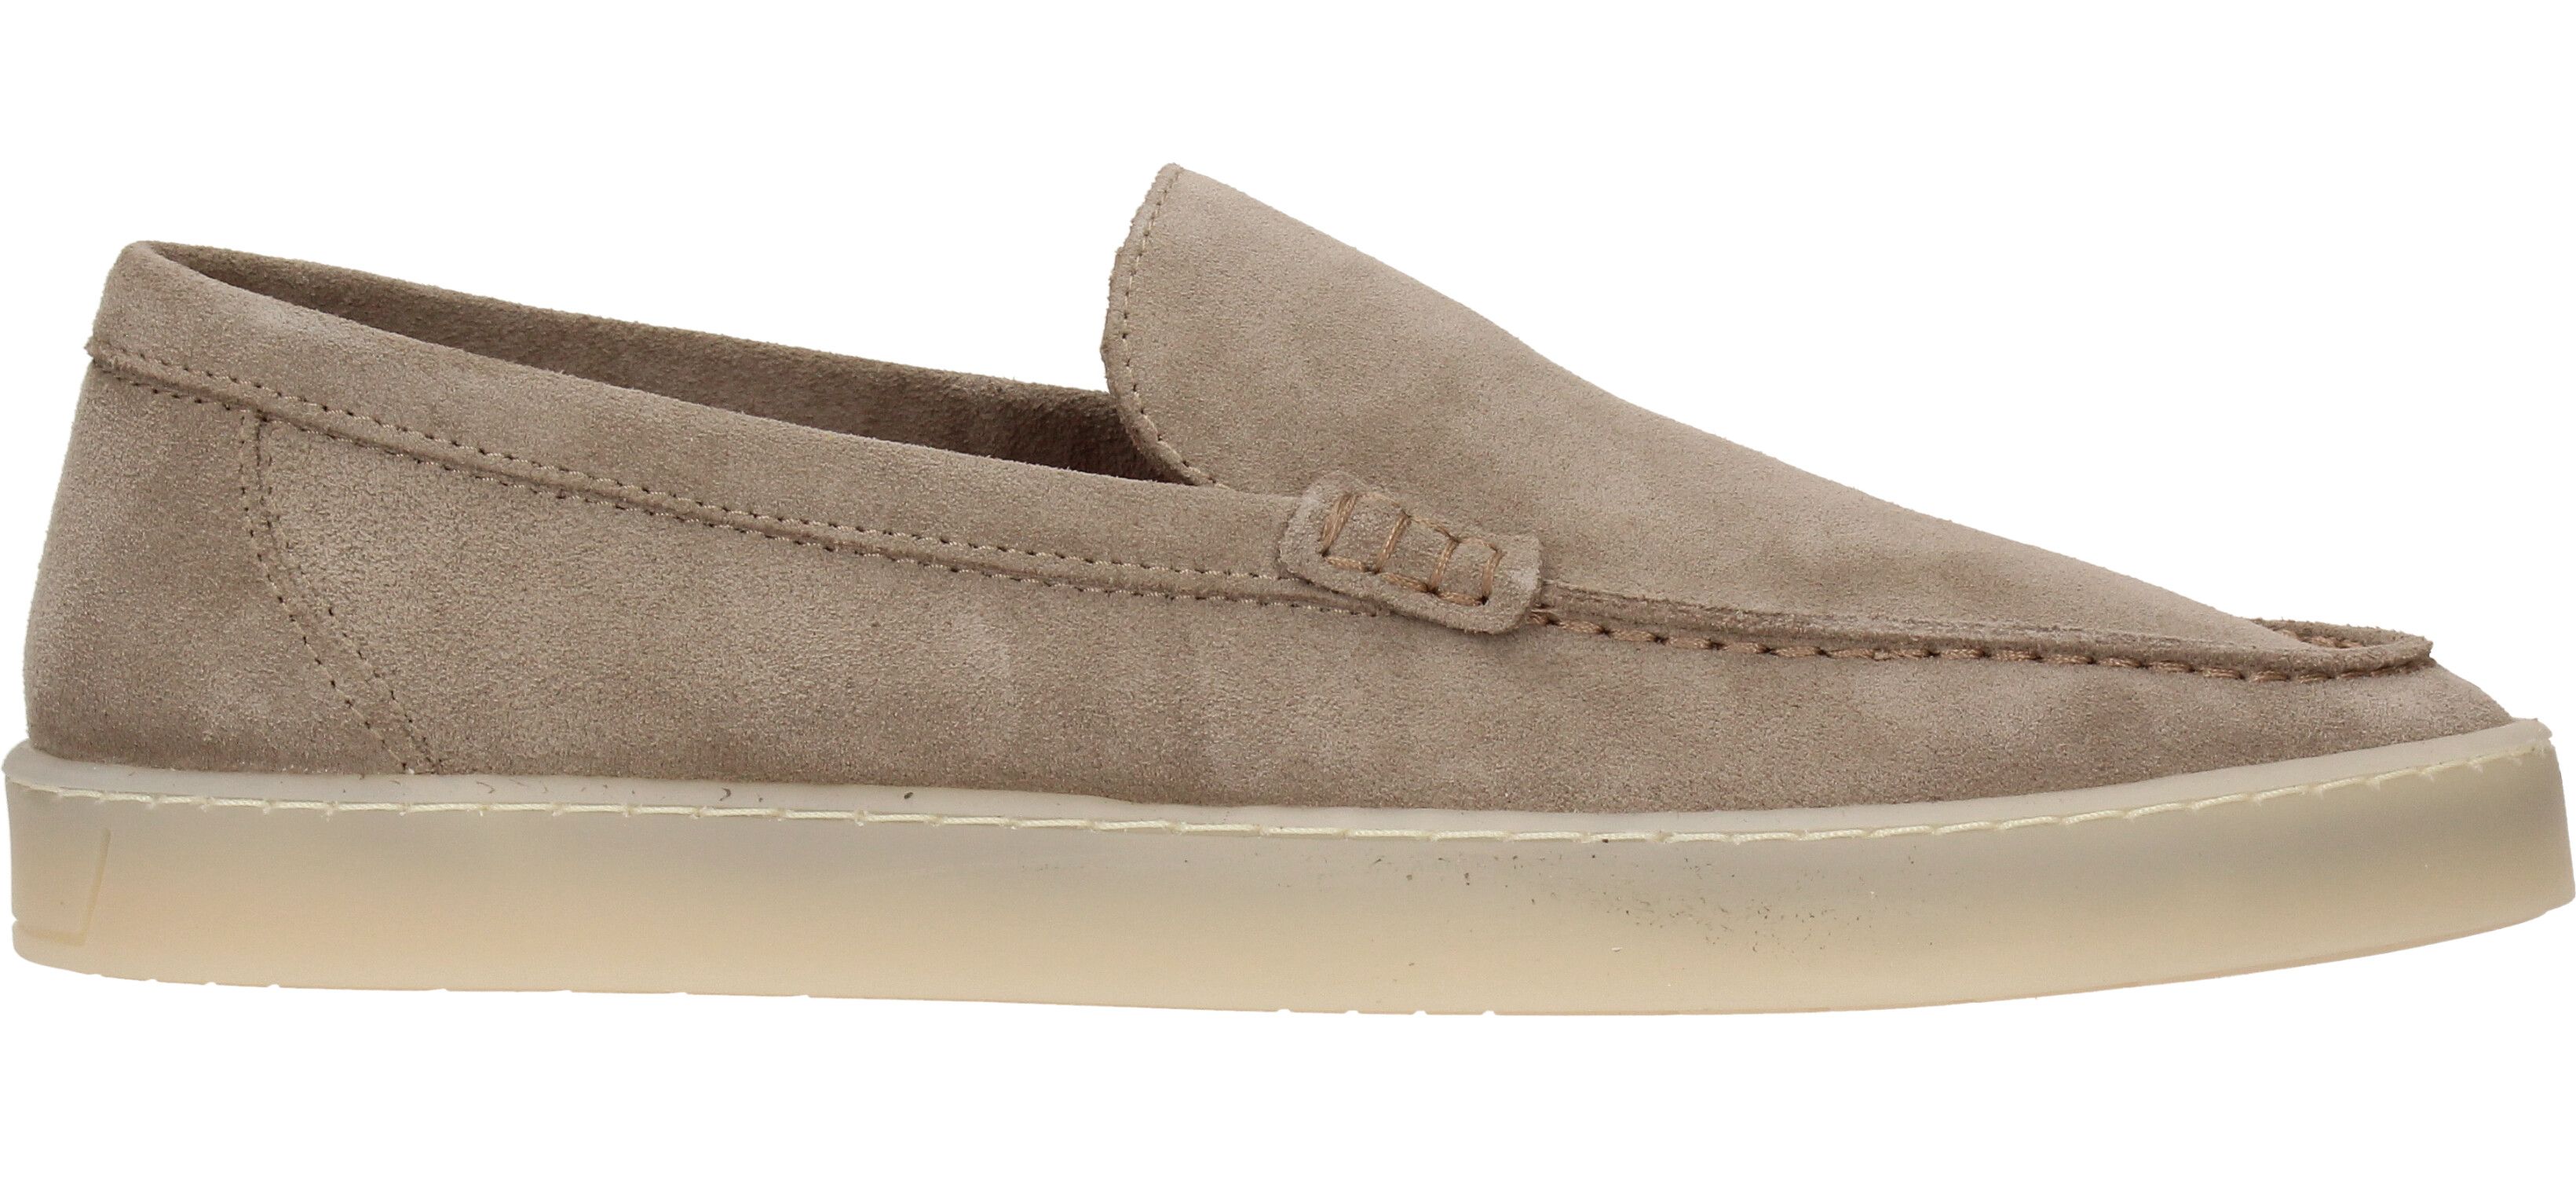 DSTRCT Loafer Heren Taupe